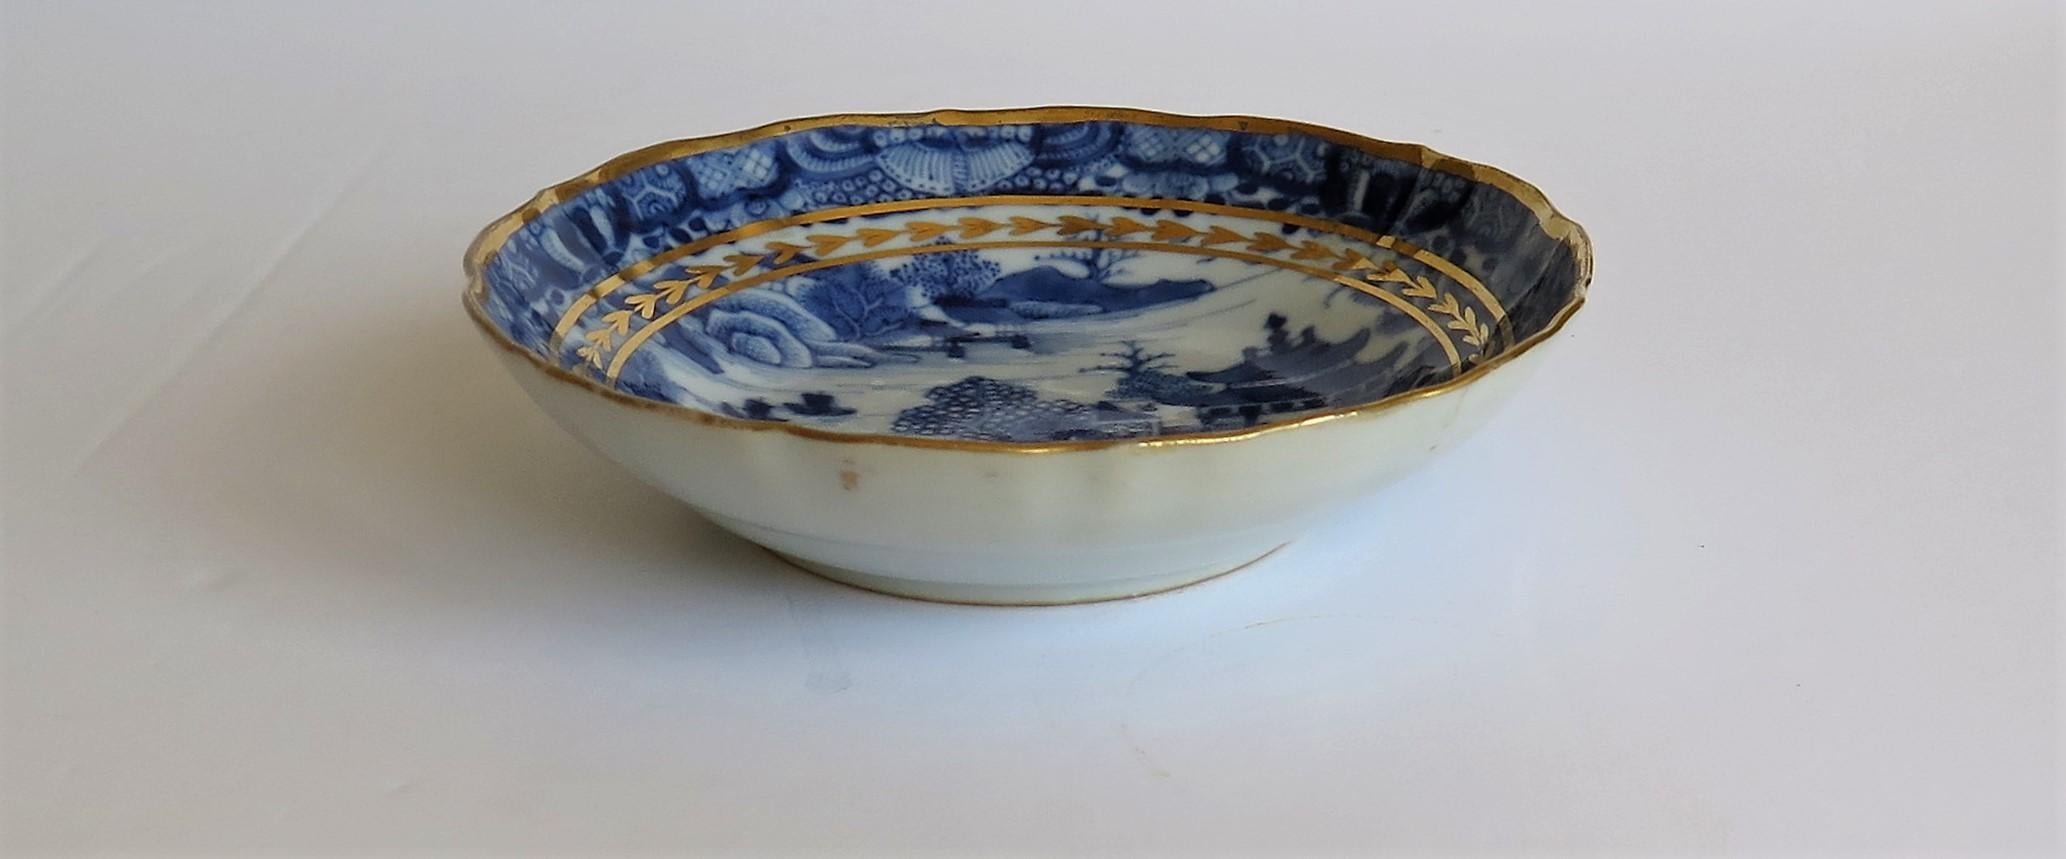 Chinese Export Porcelain Berry Bowl or Dish Blue and White Gilded, Qing 9